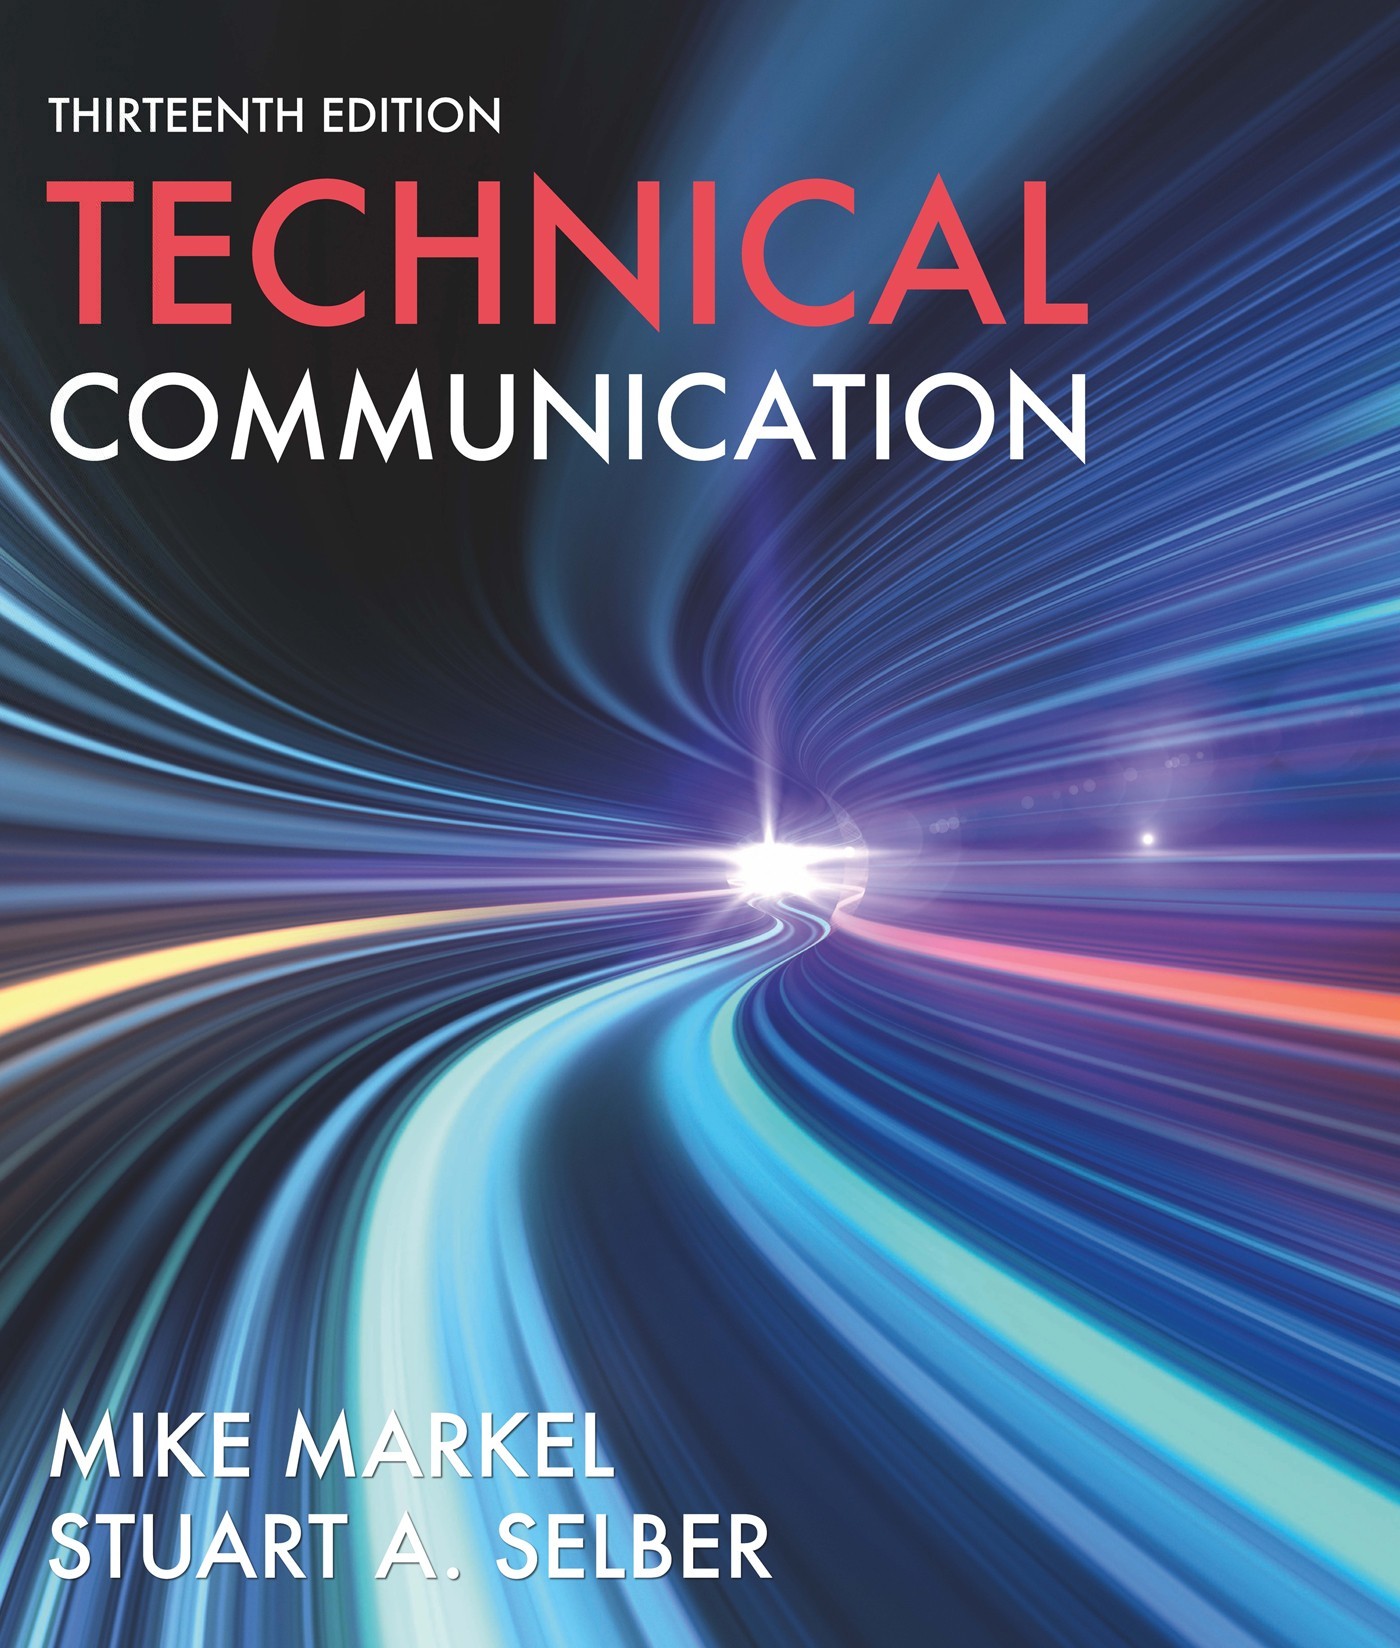 The front cover shows the name of the book Technical Communication at the - photo 1